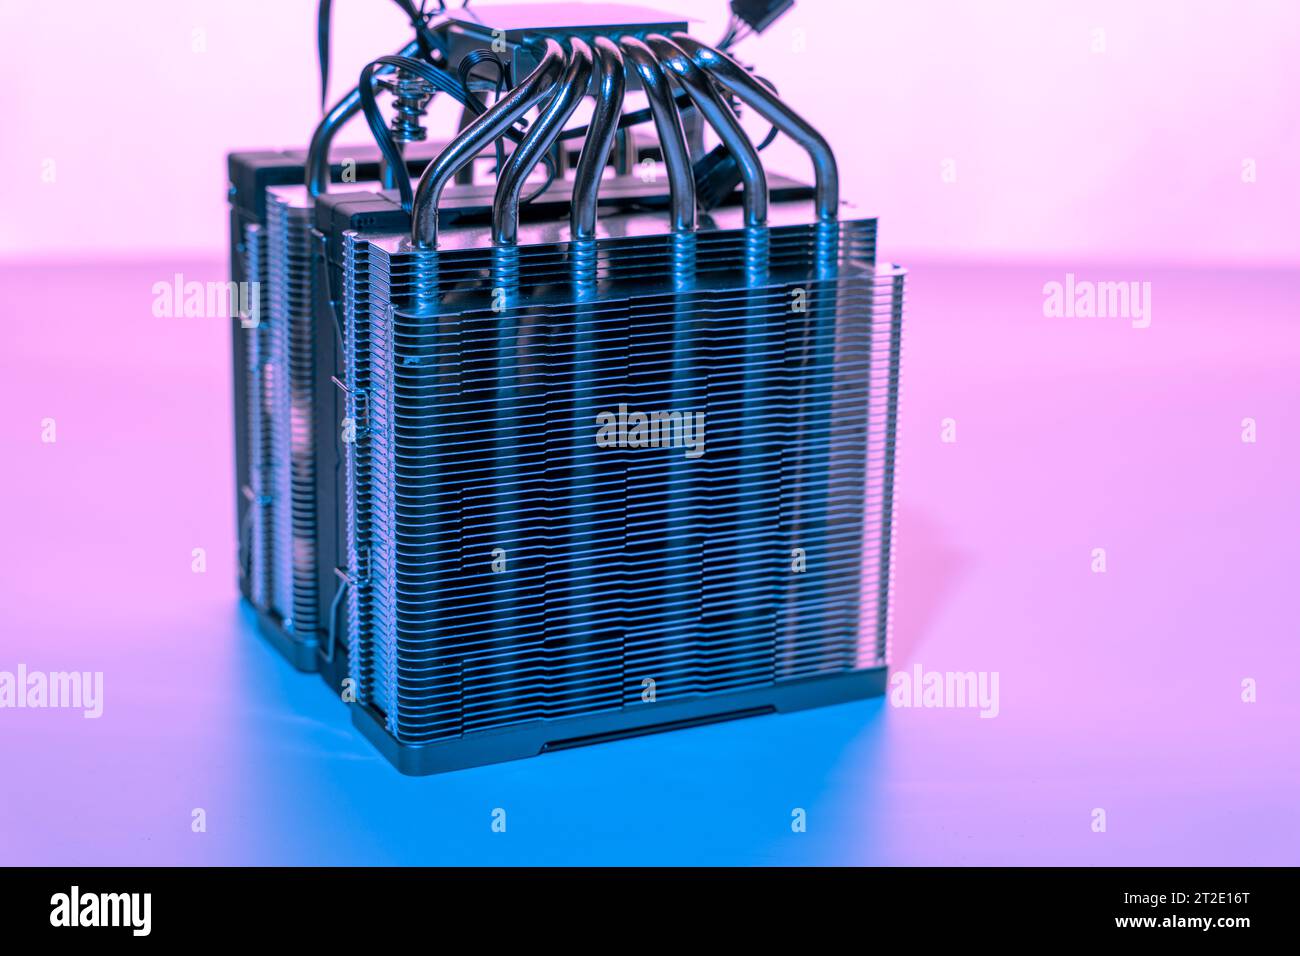 Computer fan. modern powerful cooler for cooling the CPU. Processor cooling system. concept of PC hardware. Air cooler of a personal computer processo Stock Photo